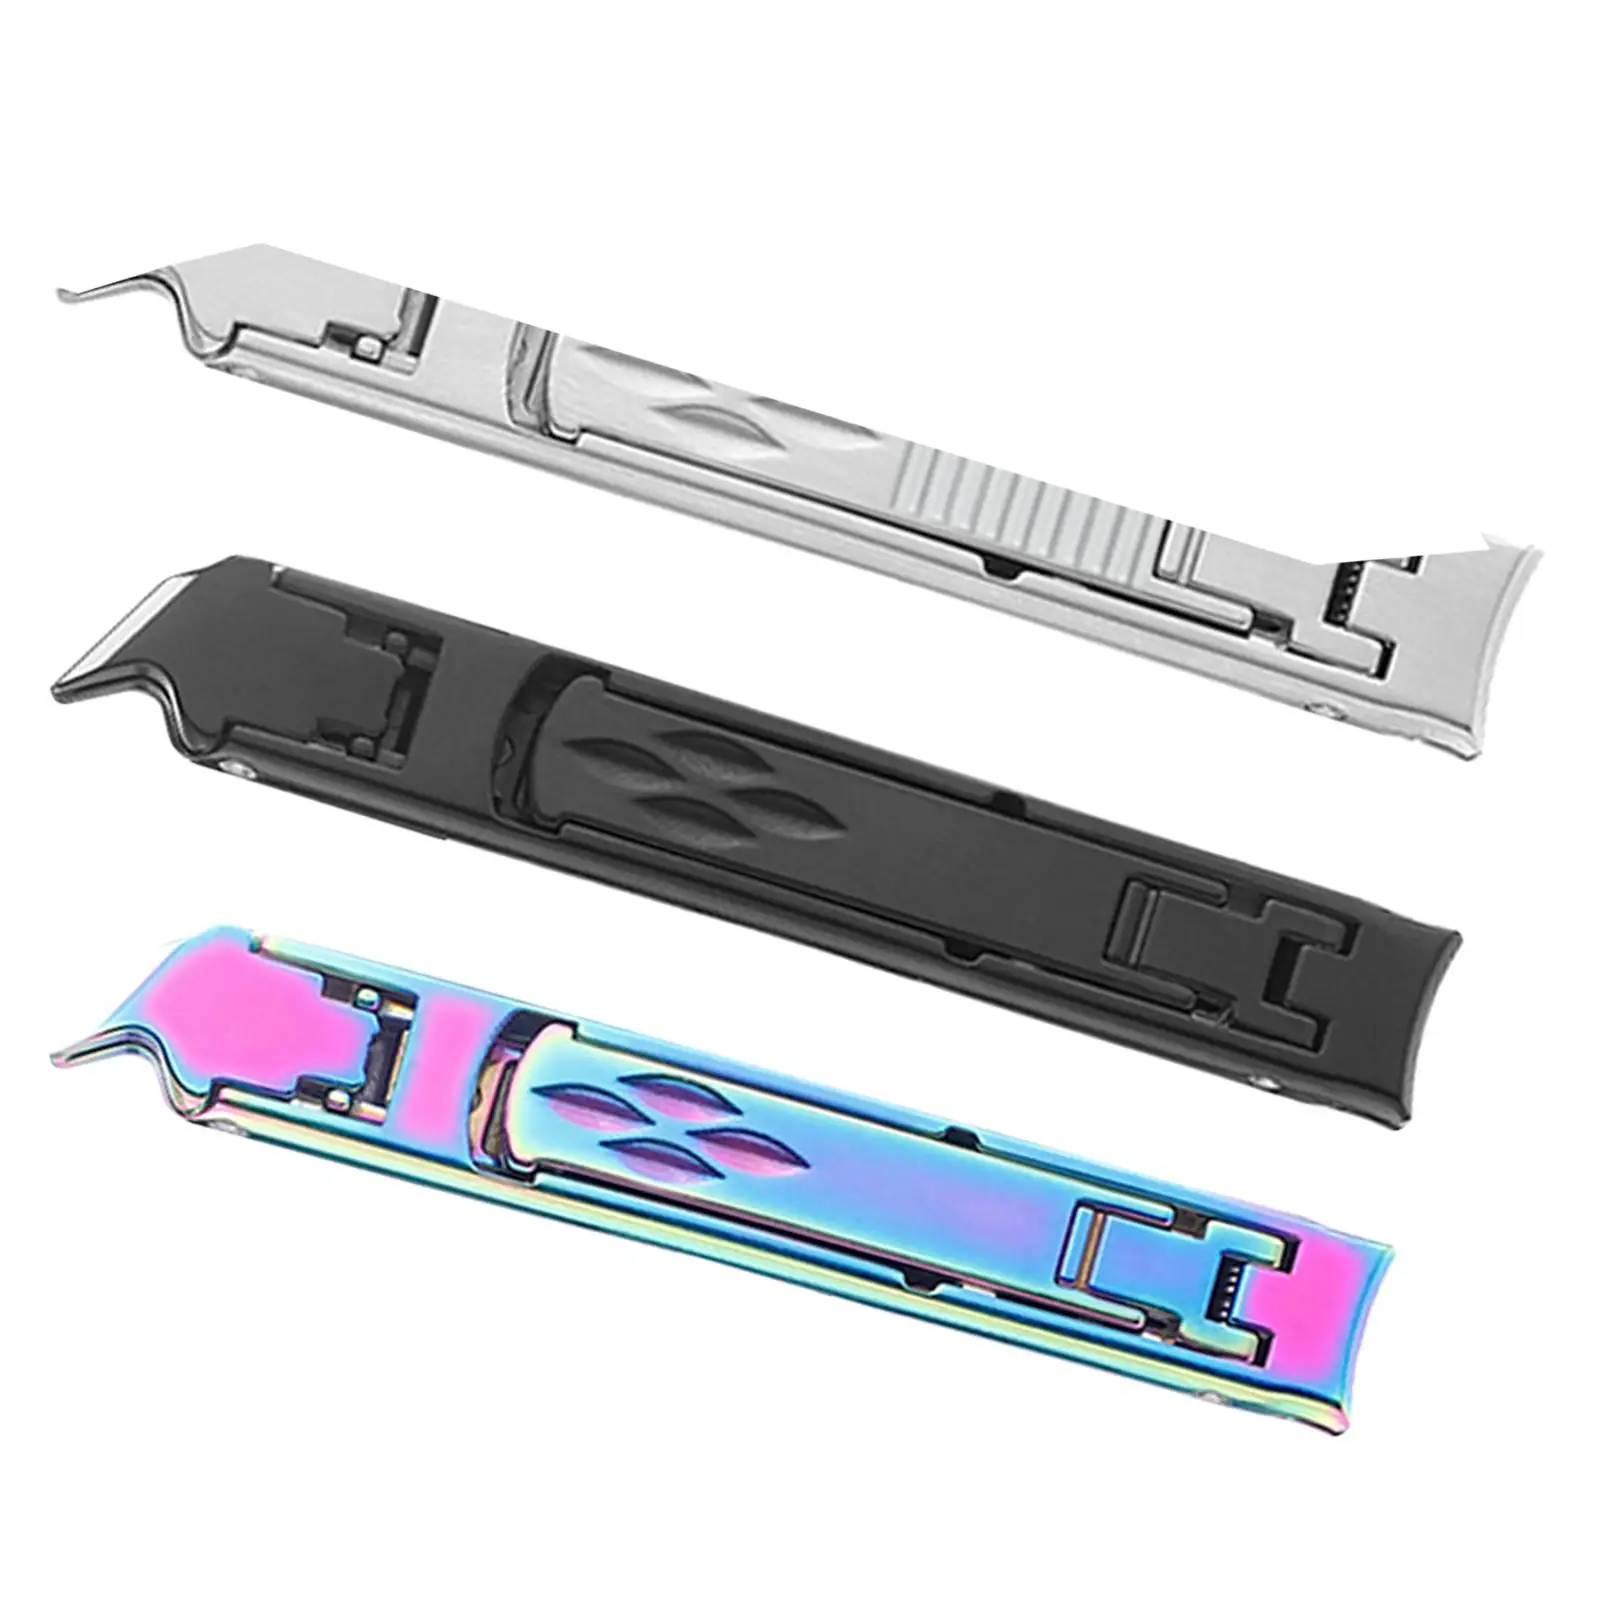 Nail Cutter Double-Headed Pliers Folding with Storage Box Premium with Polishing Sheet Sharp Thin Nail Clipper for Men Mom Women